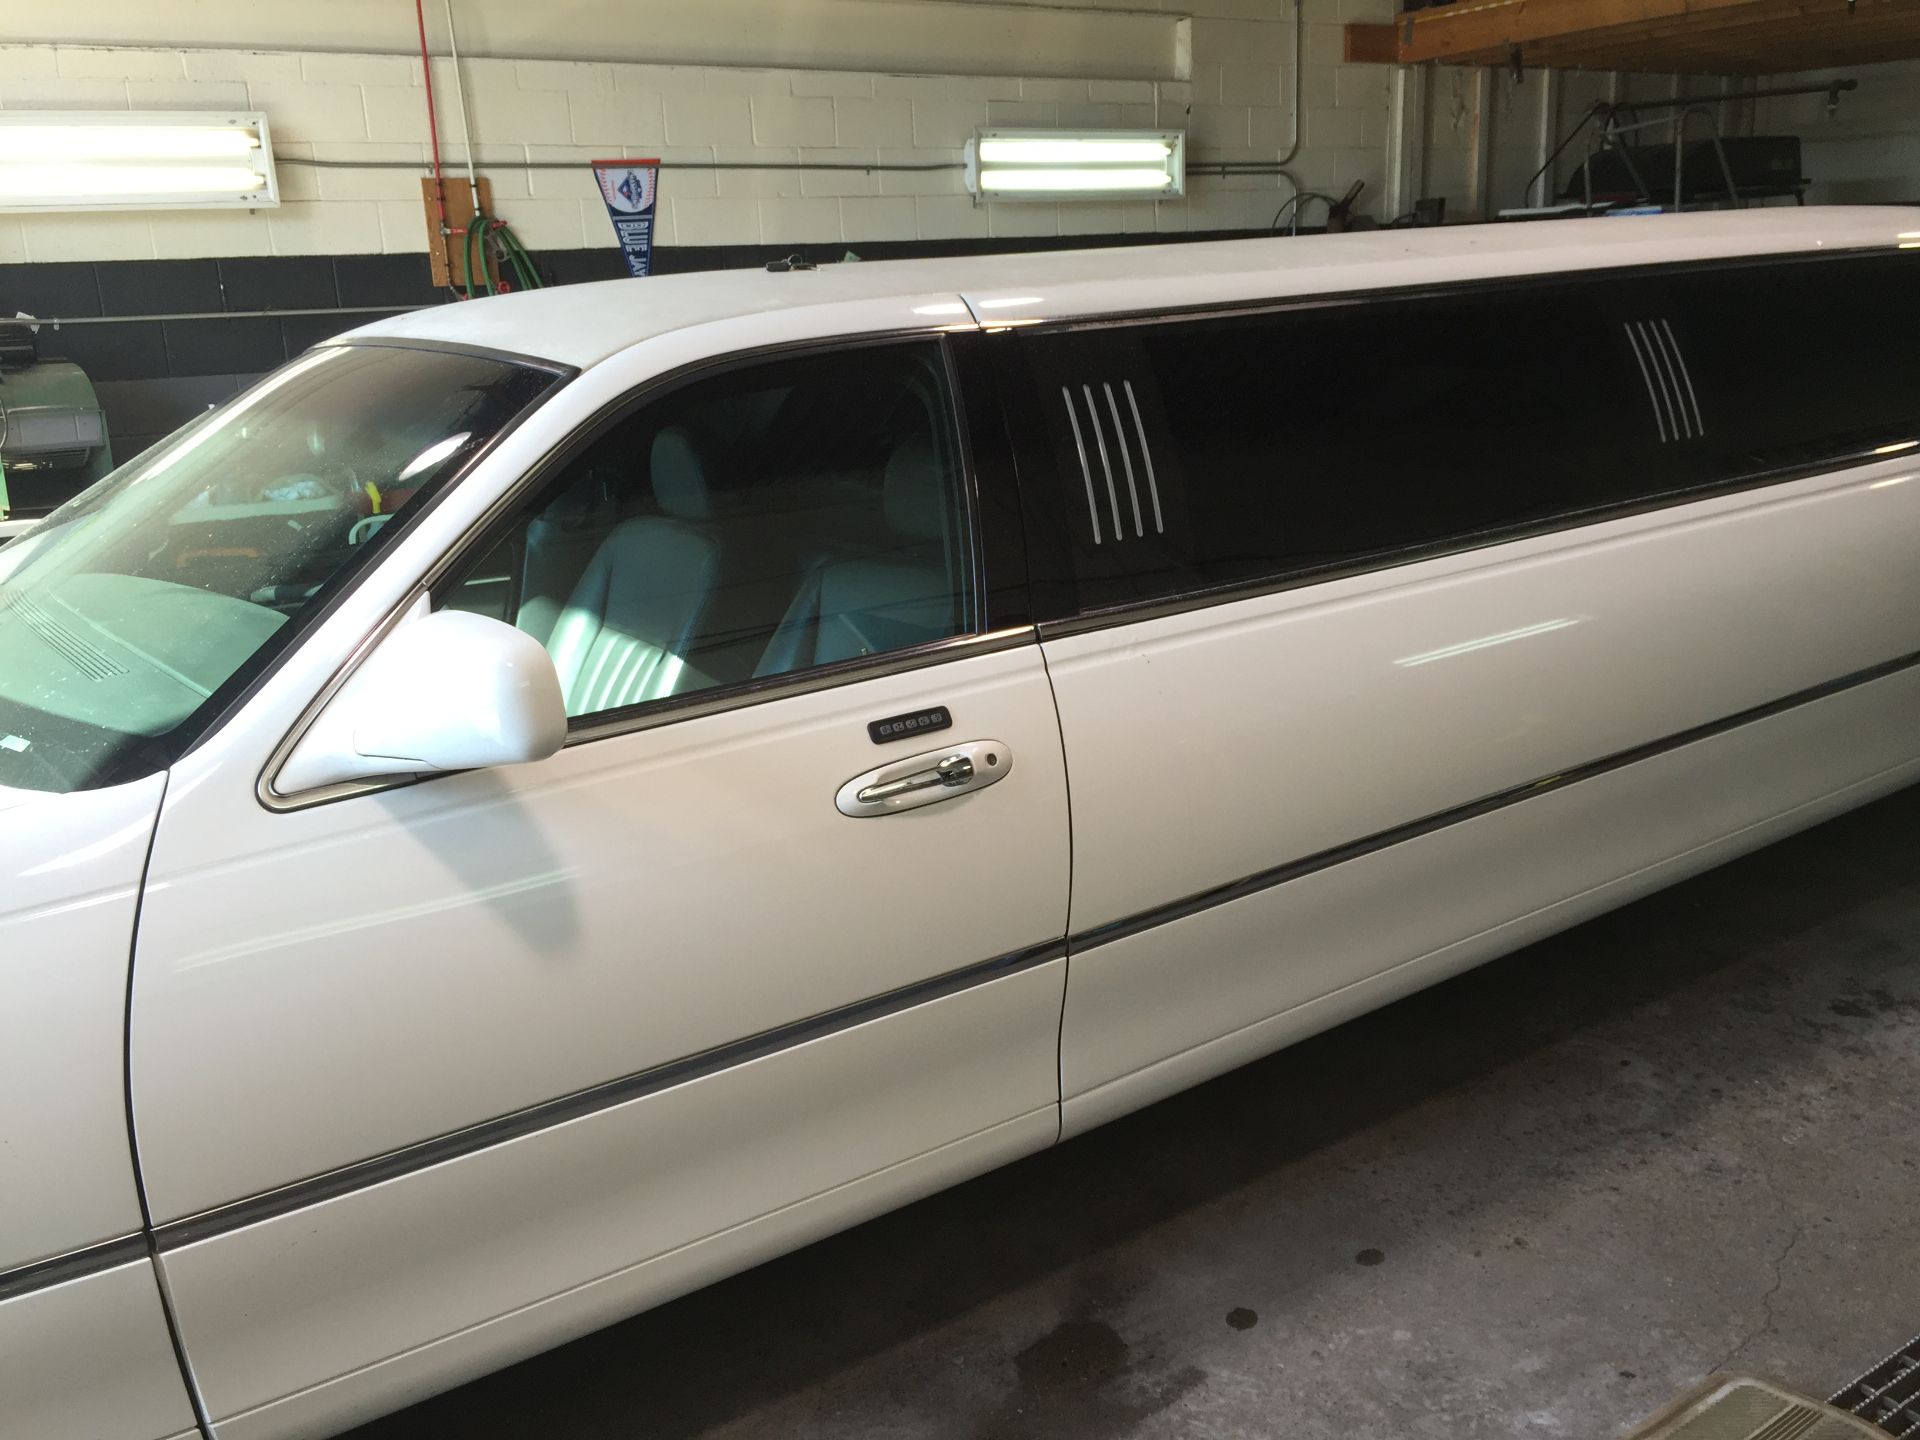 2007 Lincoln Town Car Stretch - 10 Passenger by Executive Coach - 58,600 Miles - Image 3 of 10